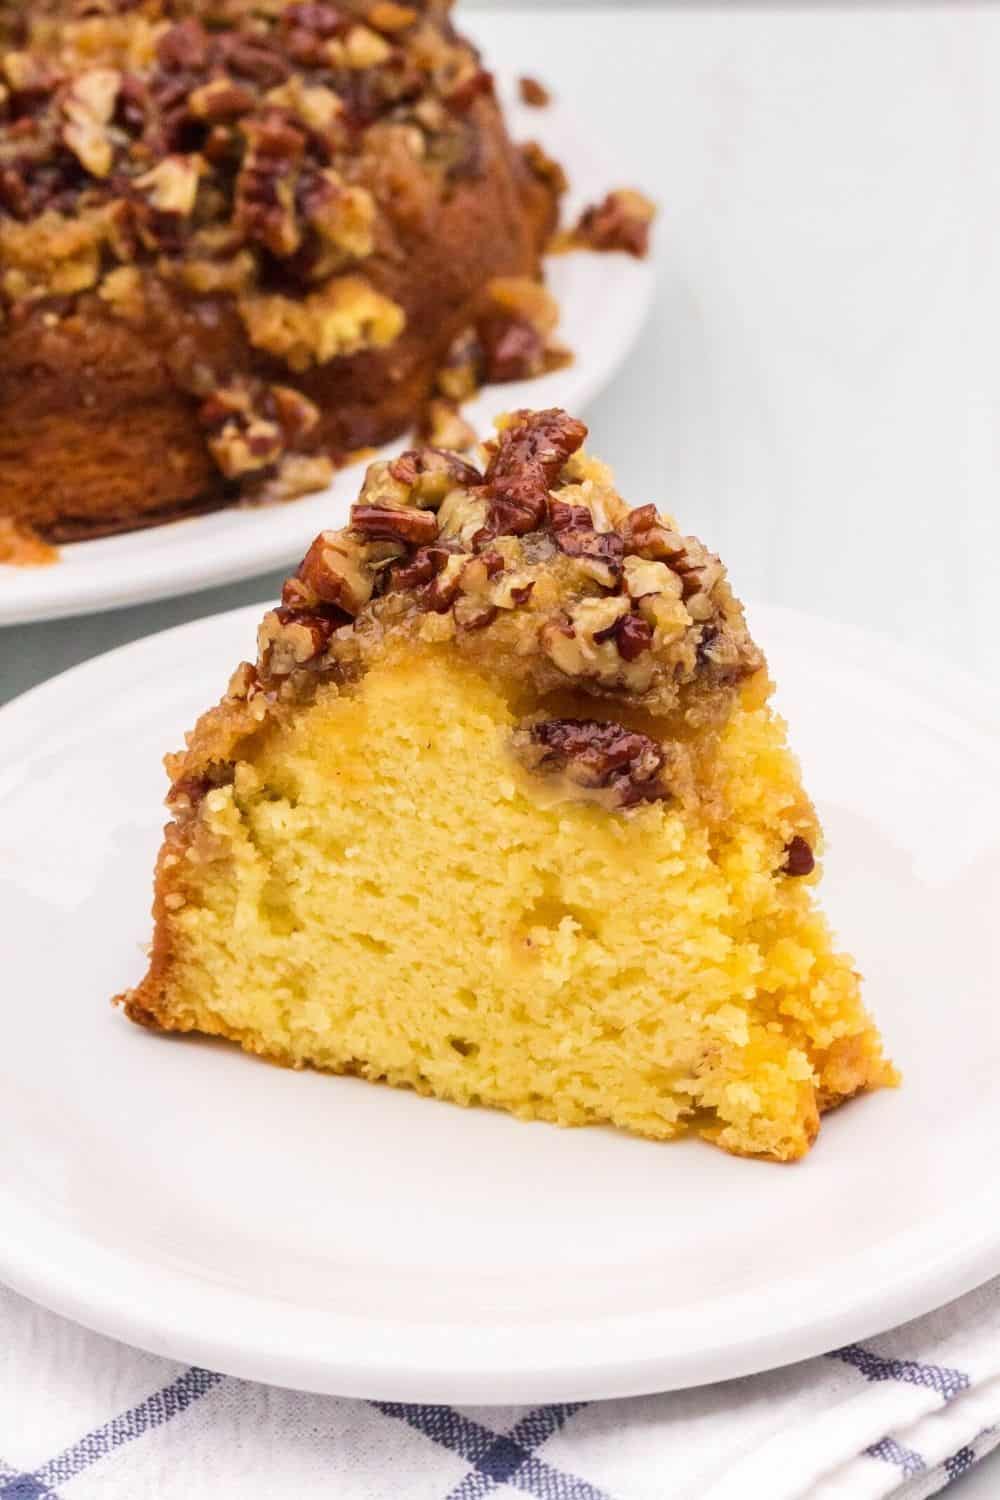 slice of cake mix pecan upside down cake served on a white plate in front of the remaining bundt cake